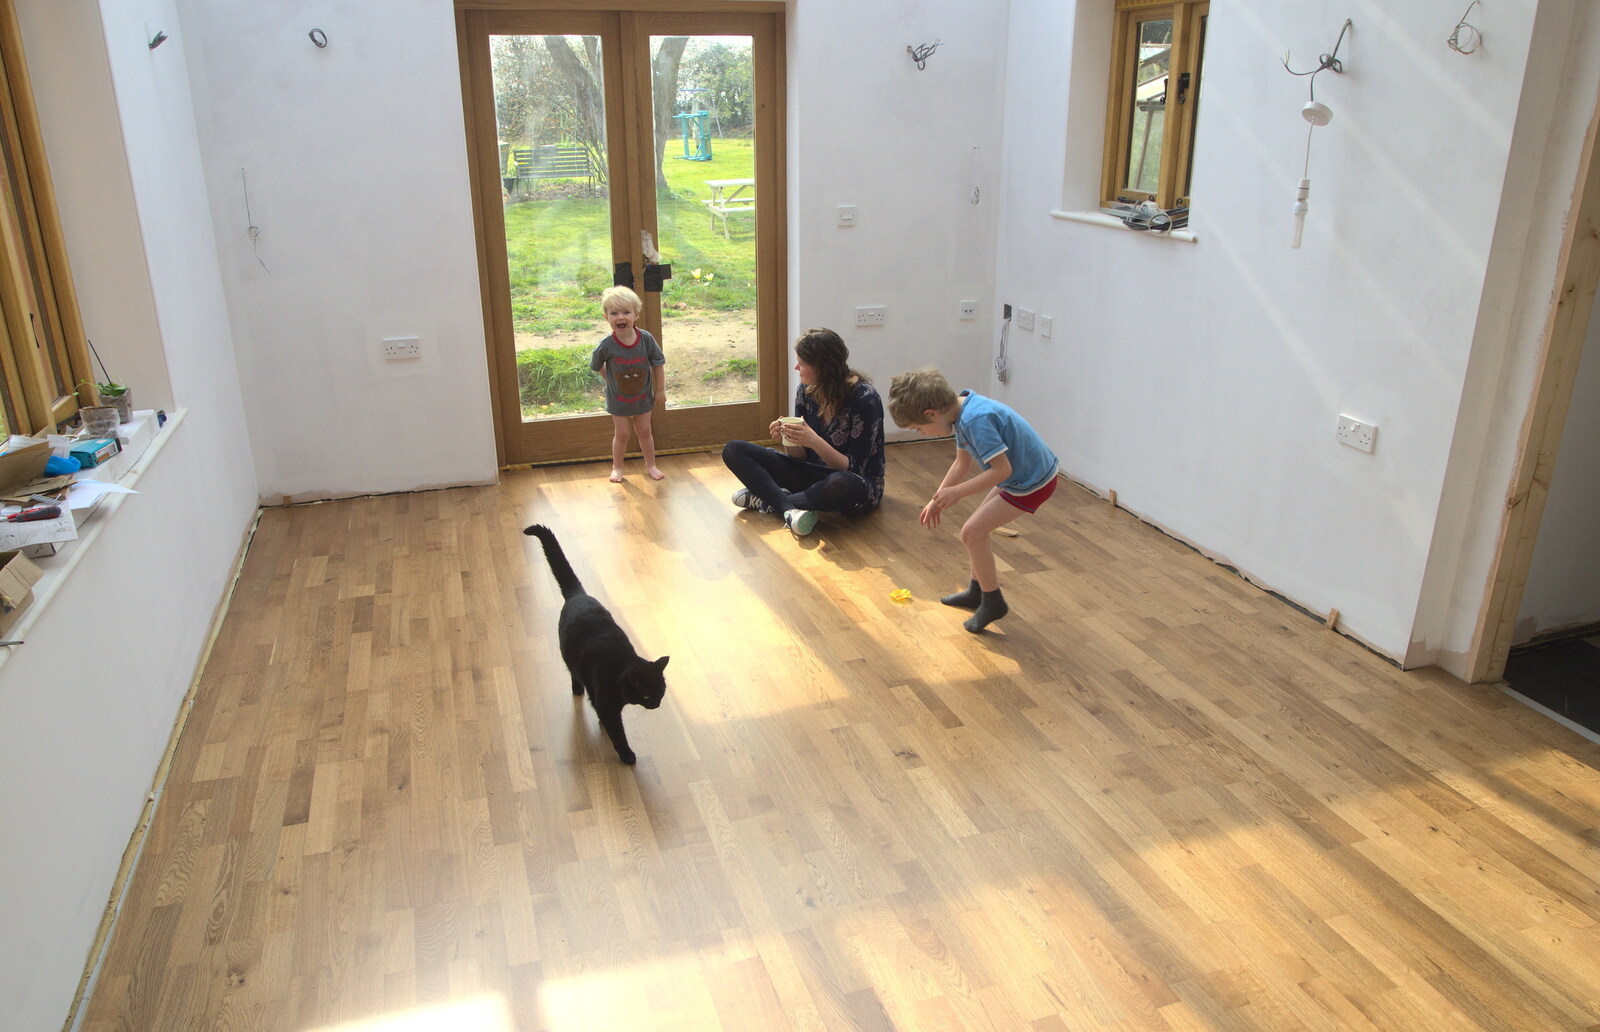 Millie the Mooch inspects the new floor from On Being Two: Harry's Birthday, Brome, Suffolk - 28th March 2014